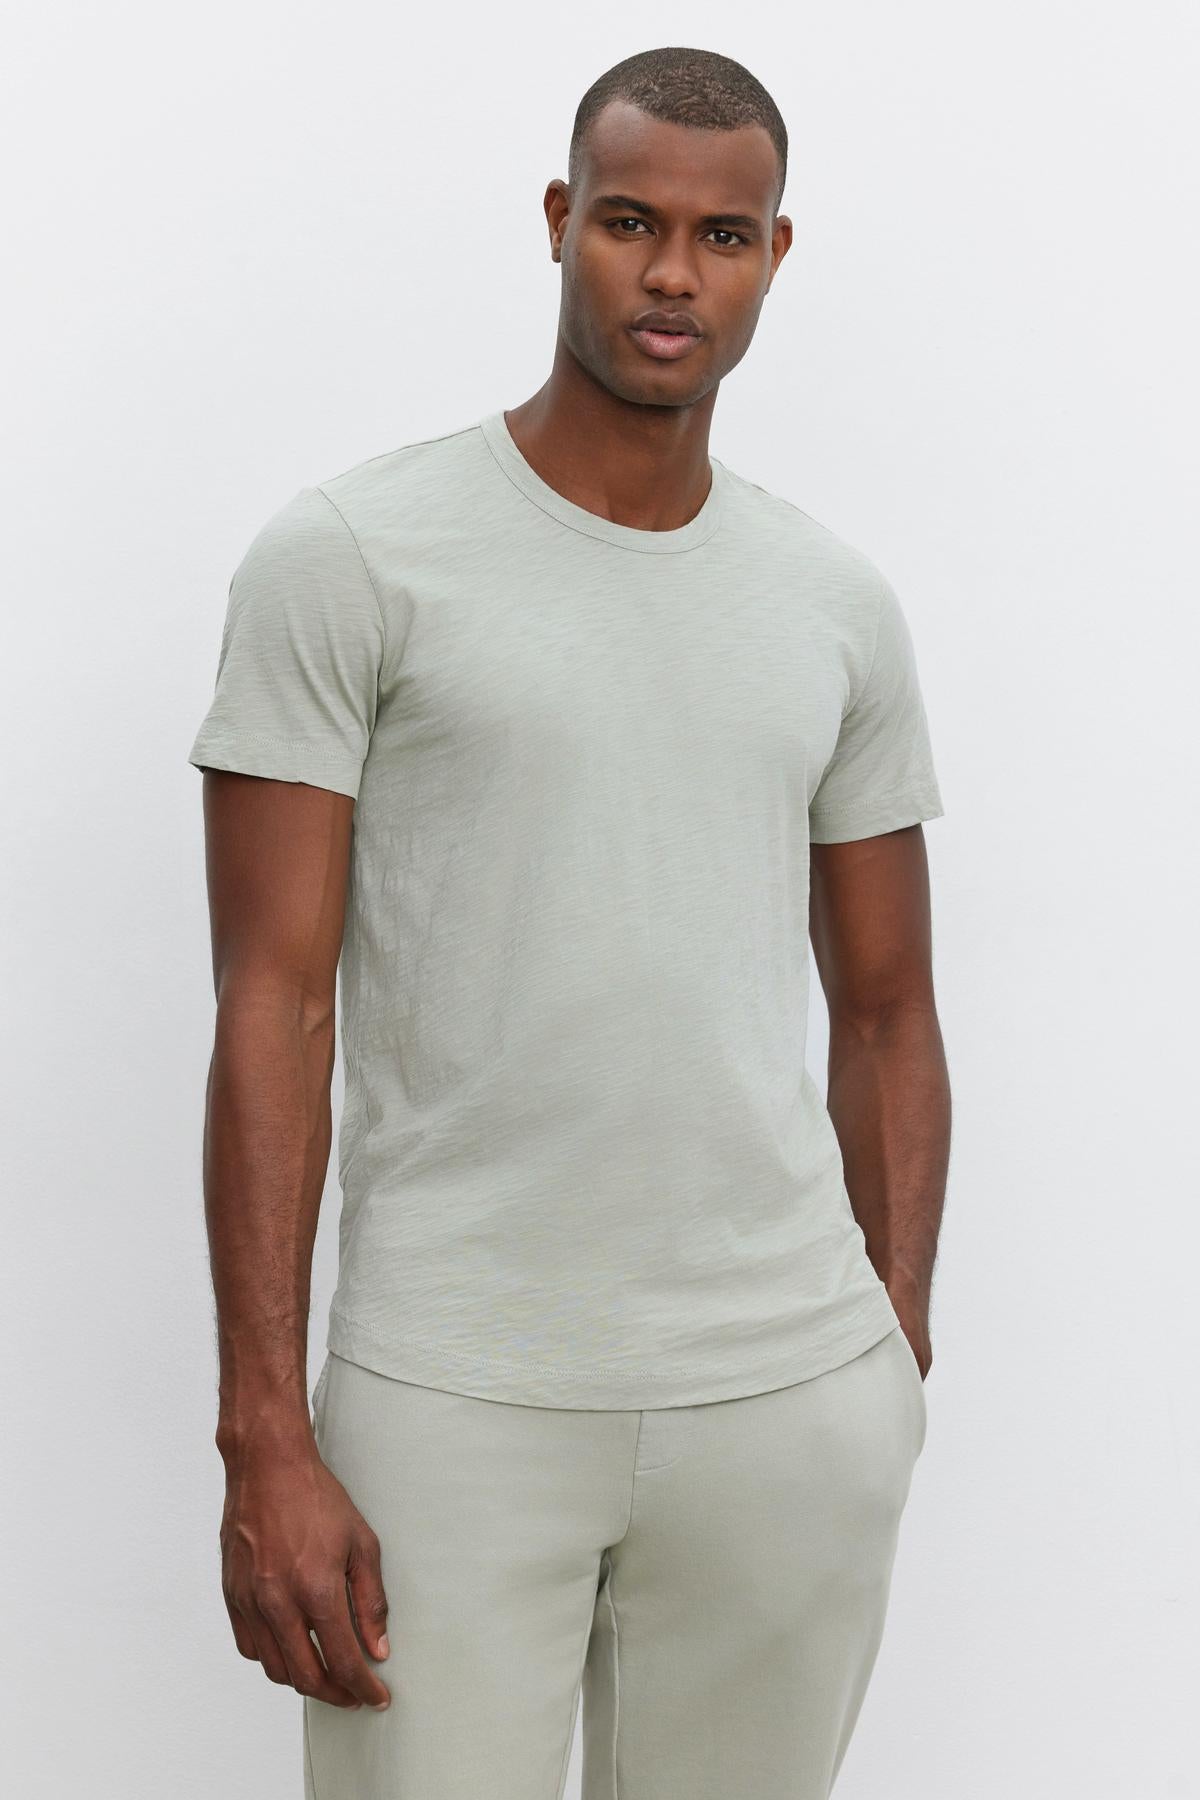 A person with a neutral expression stands against a plain white background, wearing a light grey AMARO TEE by Velvet by Graham & Spencer and matching grey pants, showcasing a versatile look with a relaxed and stylish feel.-37469132095681